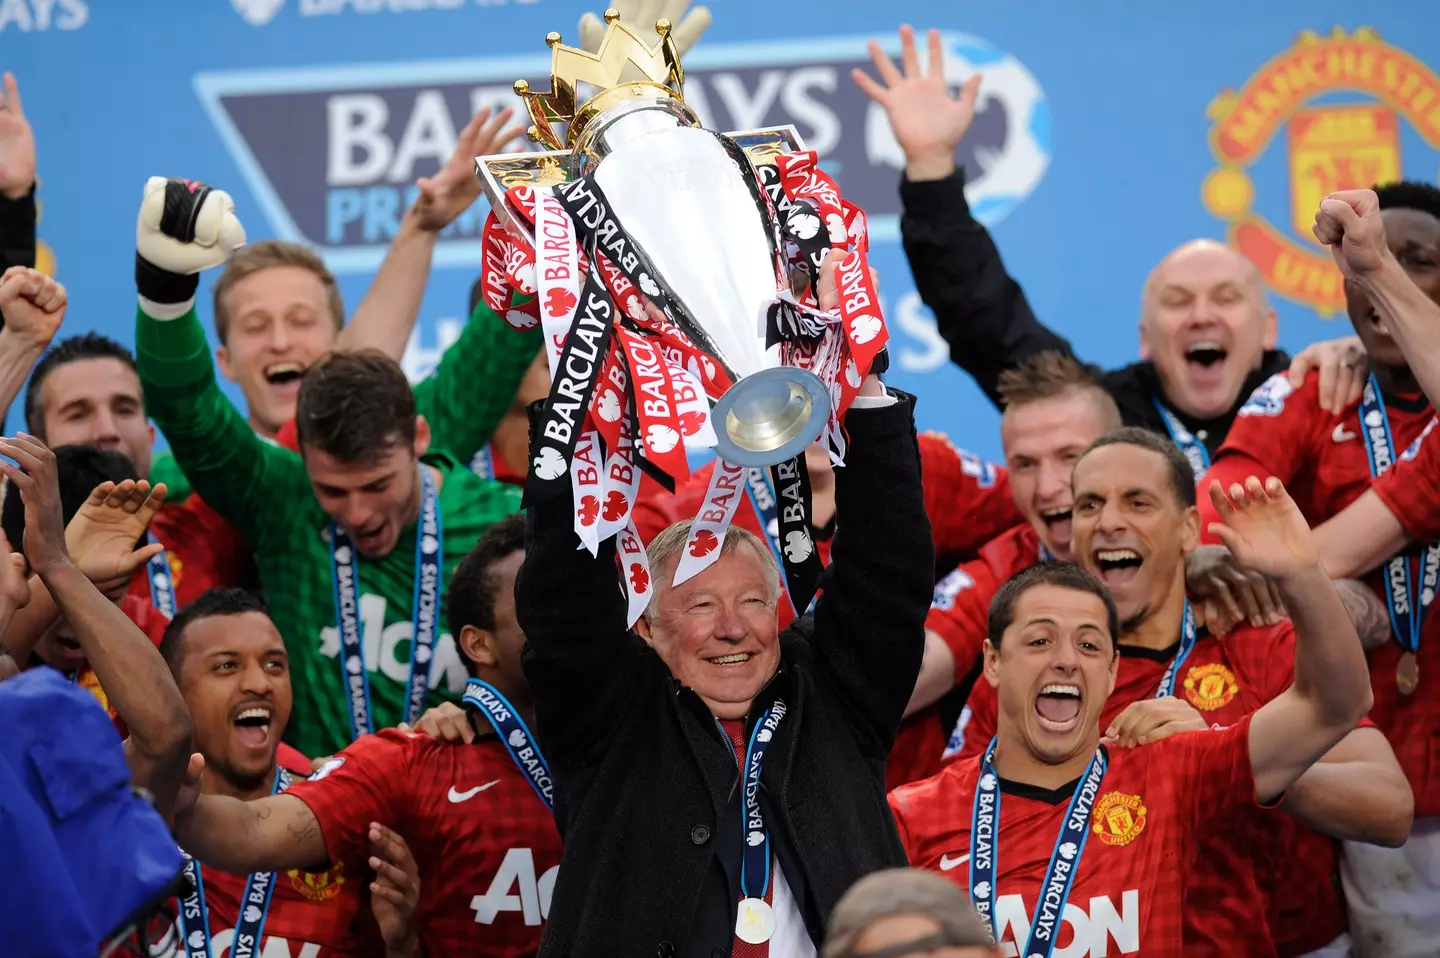 Manchester United winning their last Premier League title back in the 2012/13 season. Image: Getty